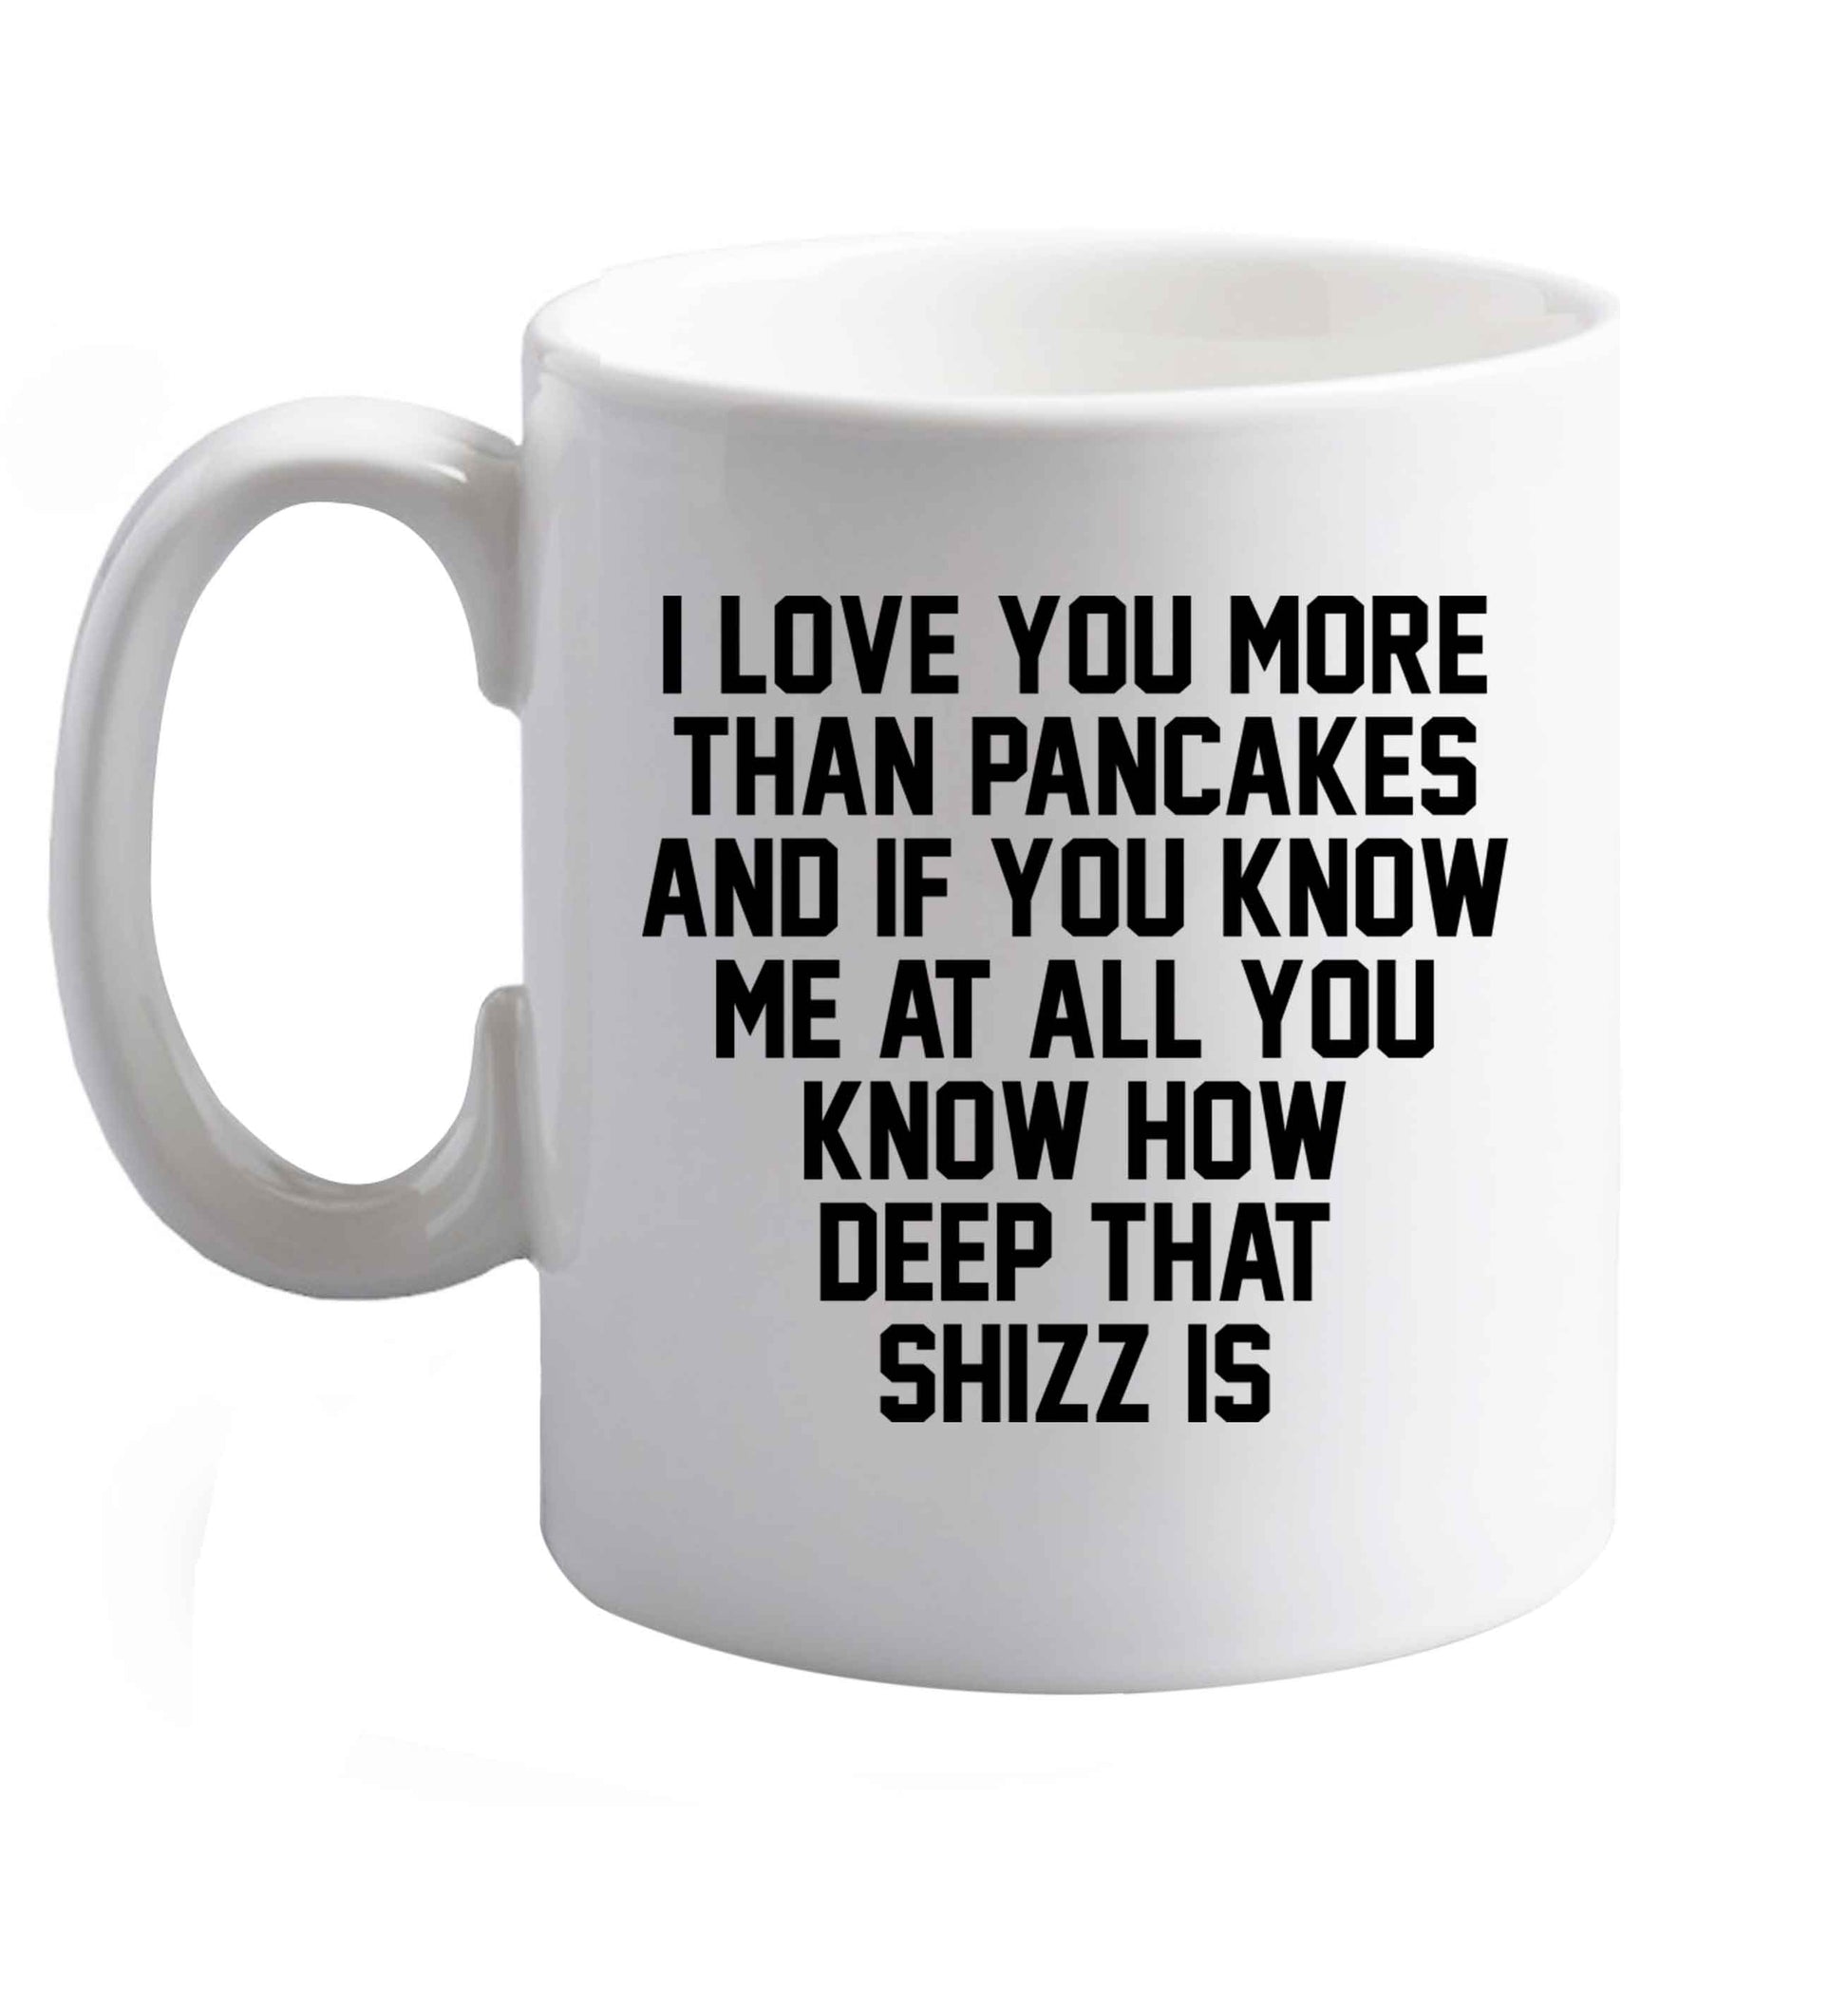 10 oz I love you more than pancakes and if you know me at all you know how deep that shizz is ceramic mug right handed